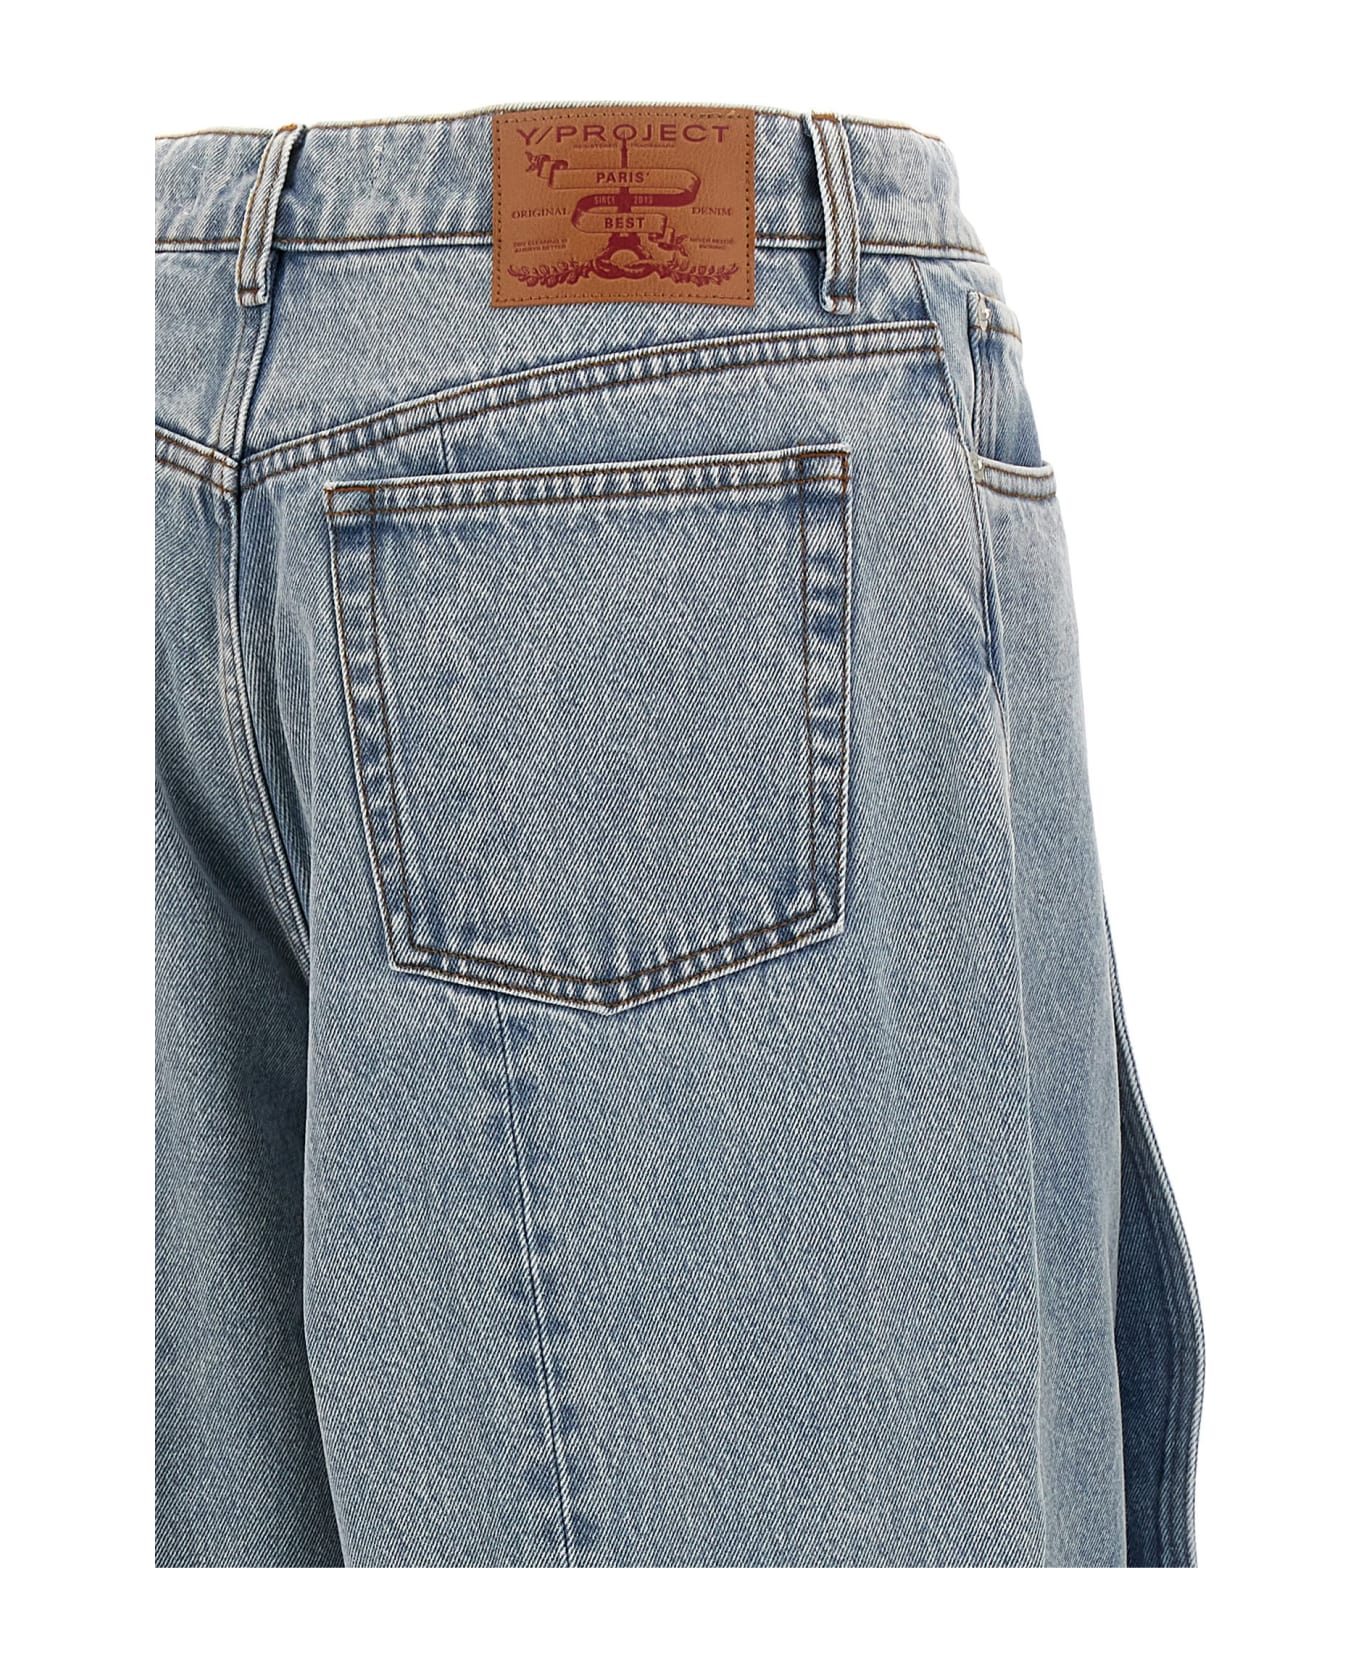 Y/Project 'evergreen Banana' Jeans - Light Blue